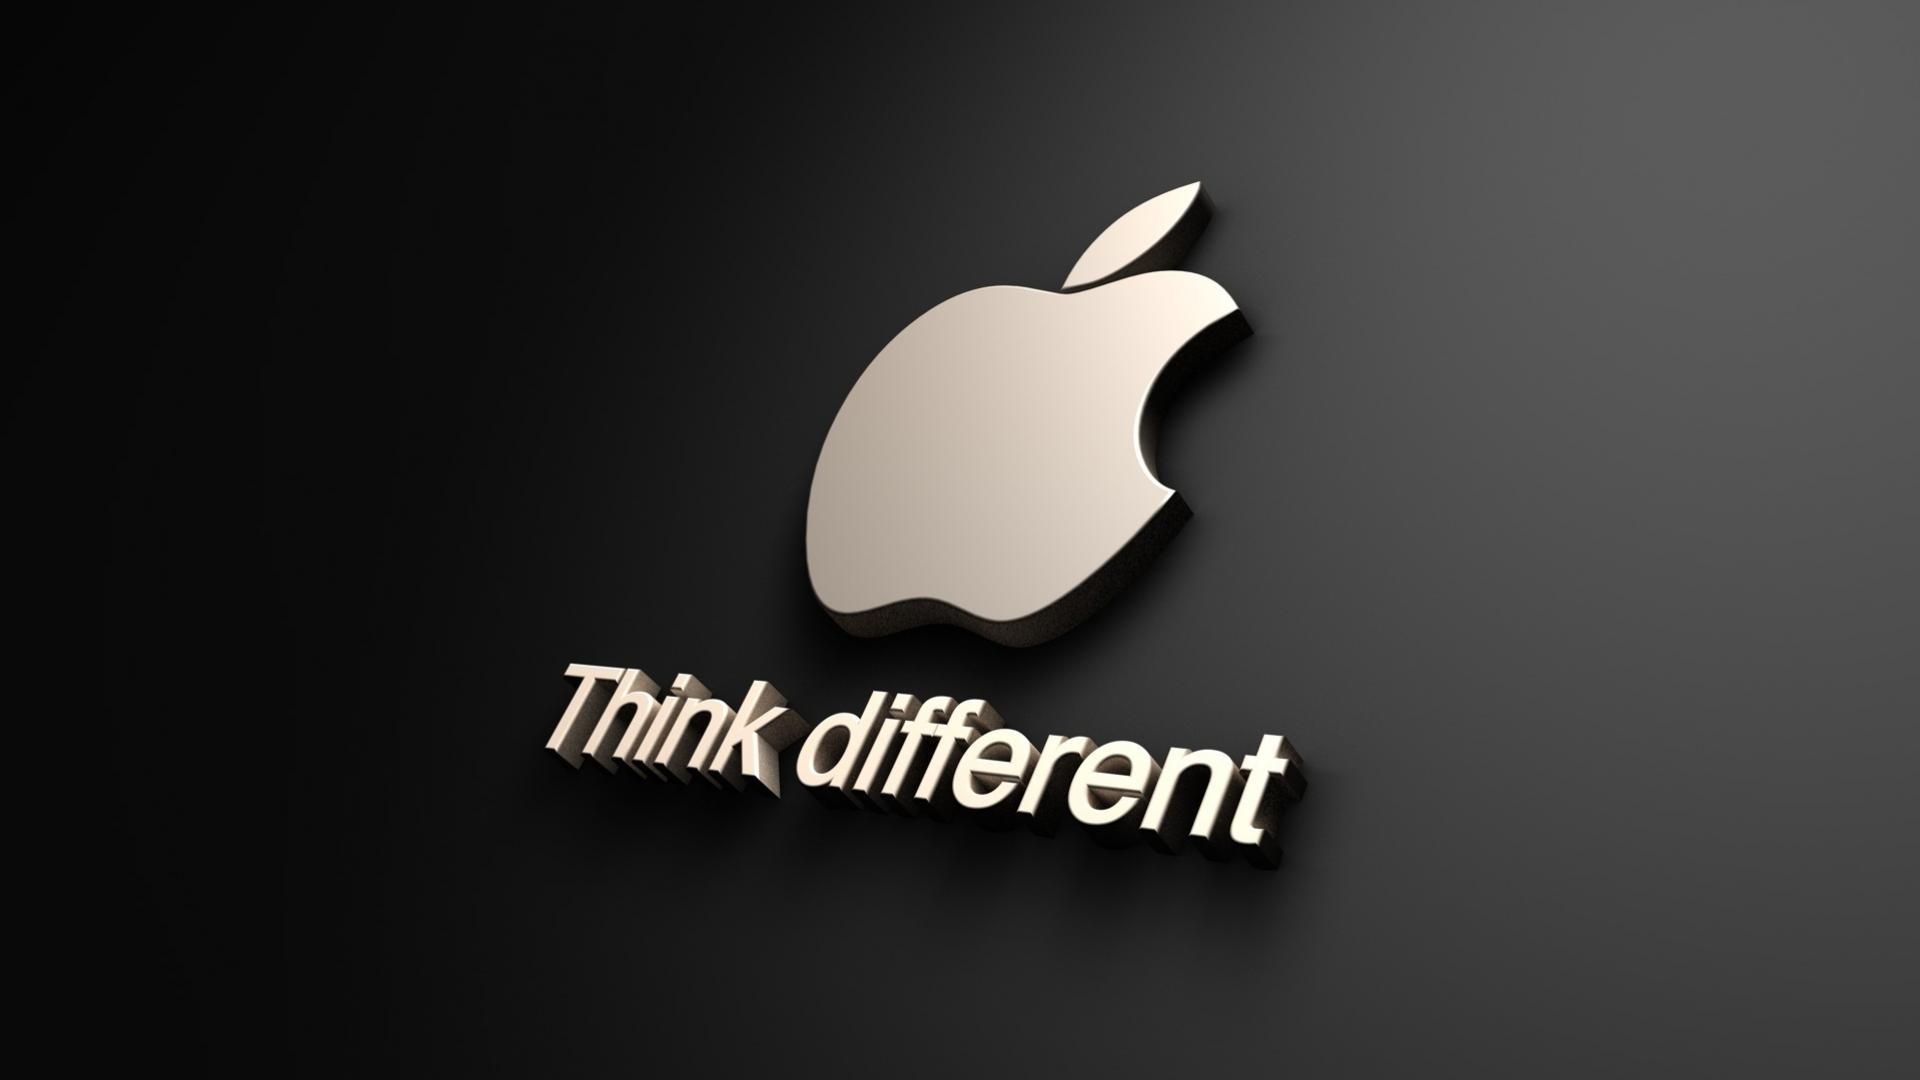 Official Apple Logo Hd Backgrounds Wallpapers 21 HD Wallpapers